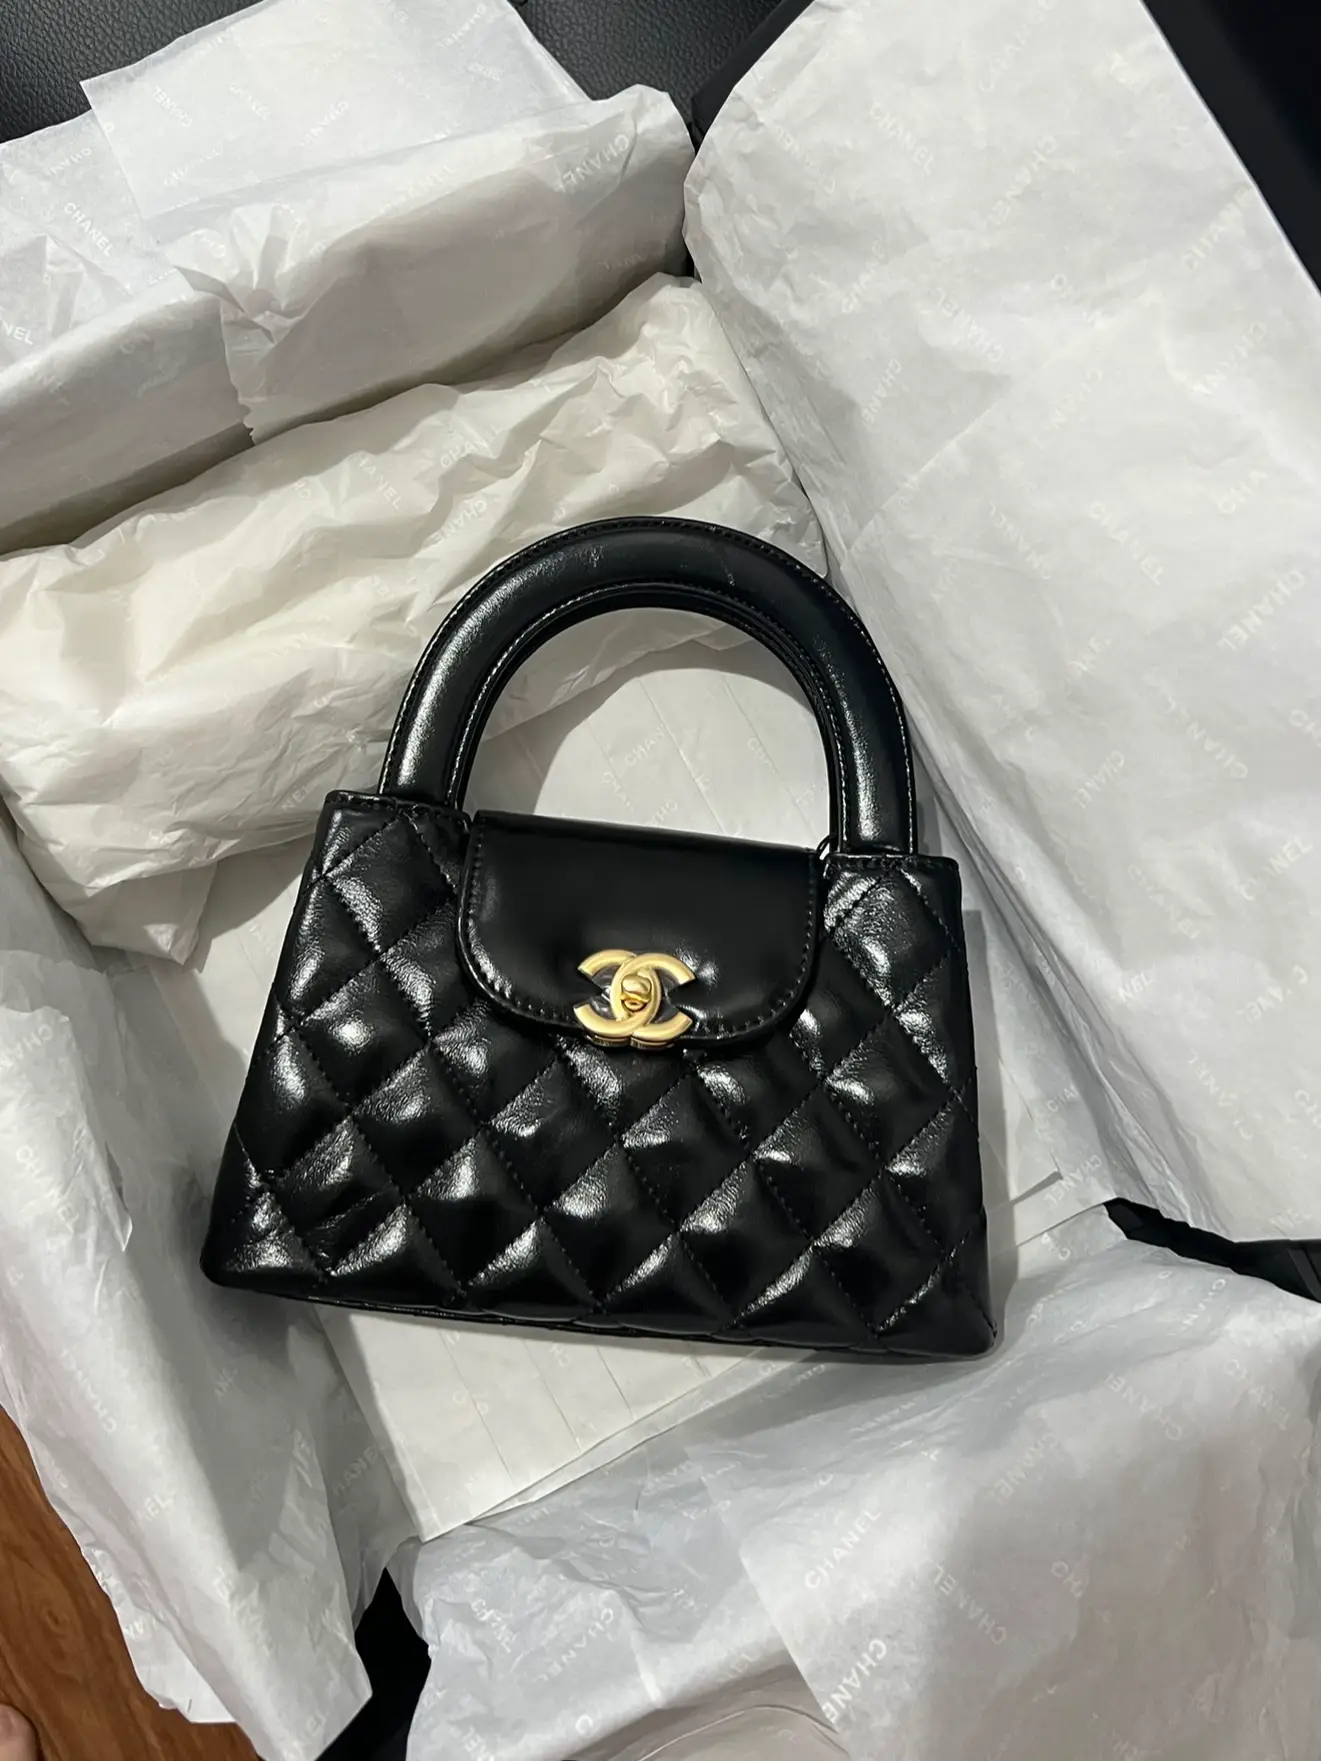 New Bag : Chanel Kelly Bag, Gallery posted by Racha.ttuu